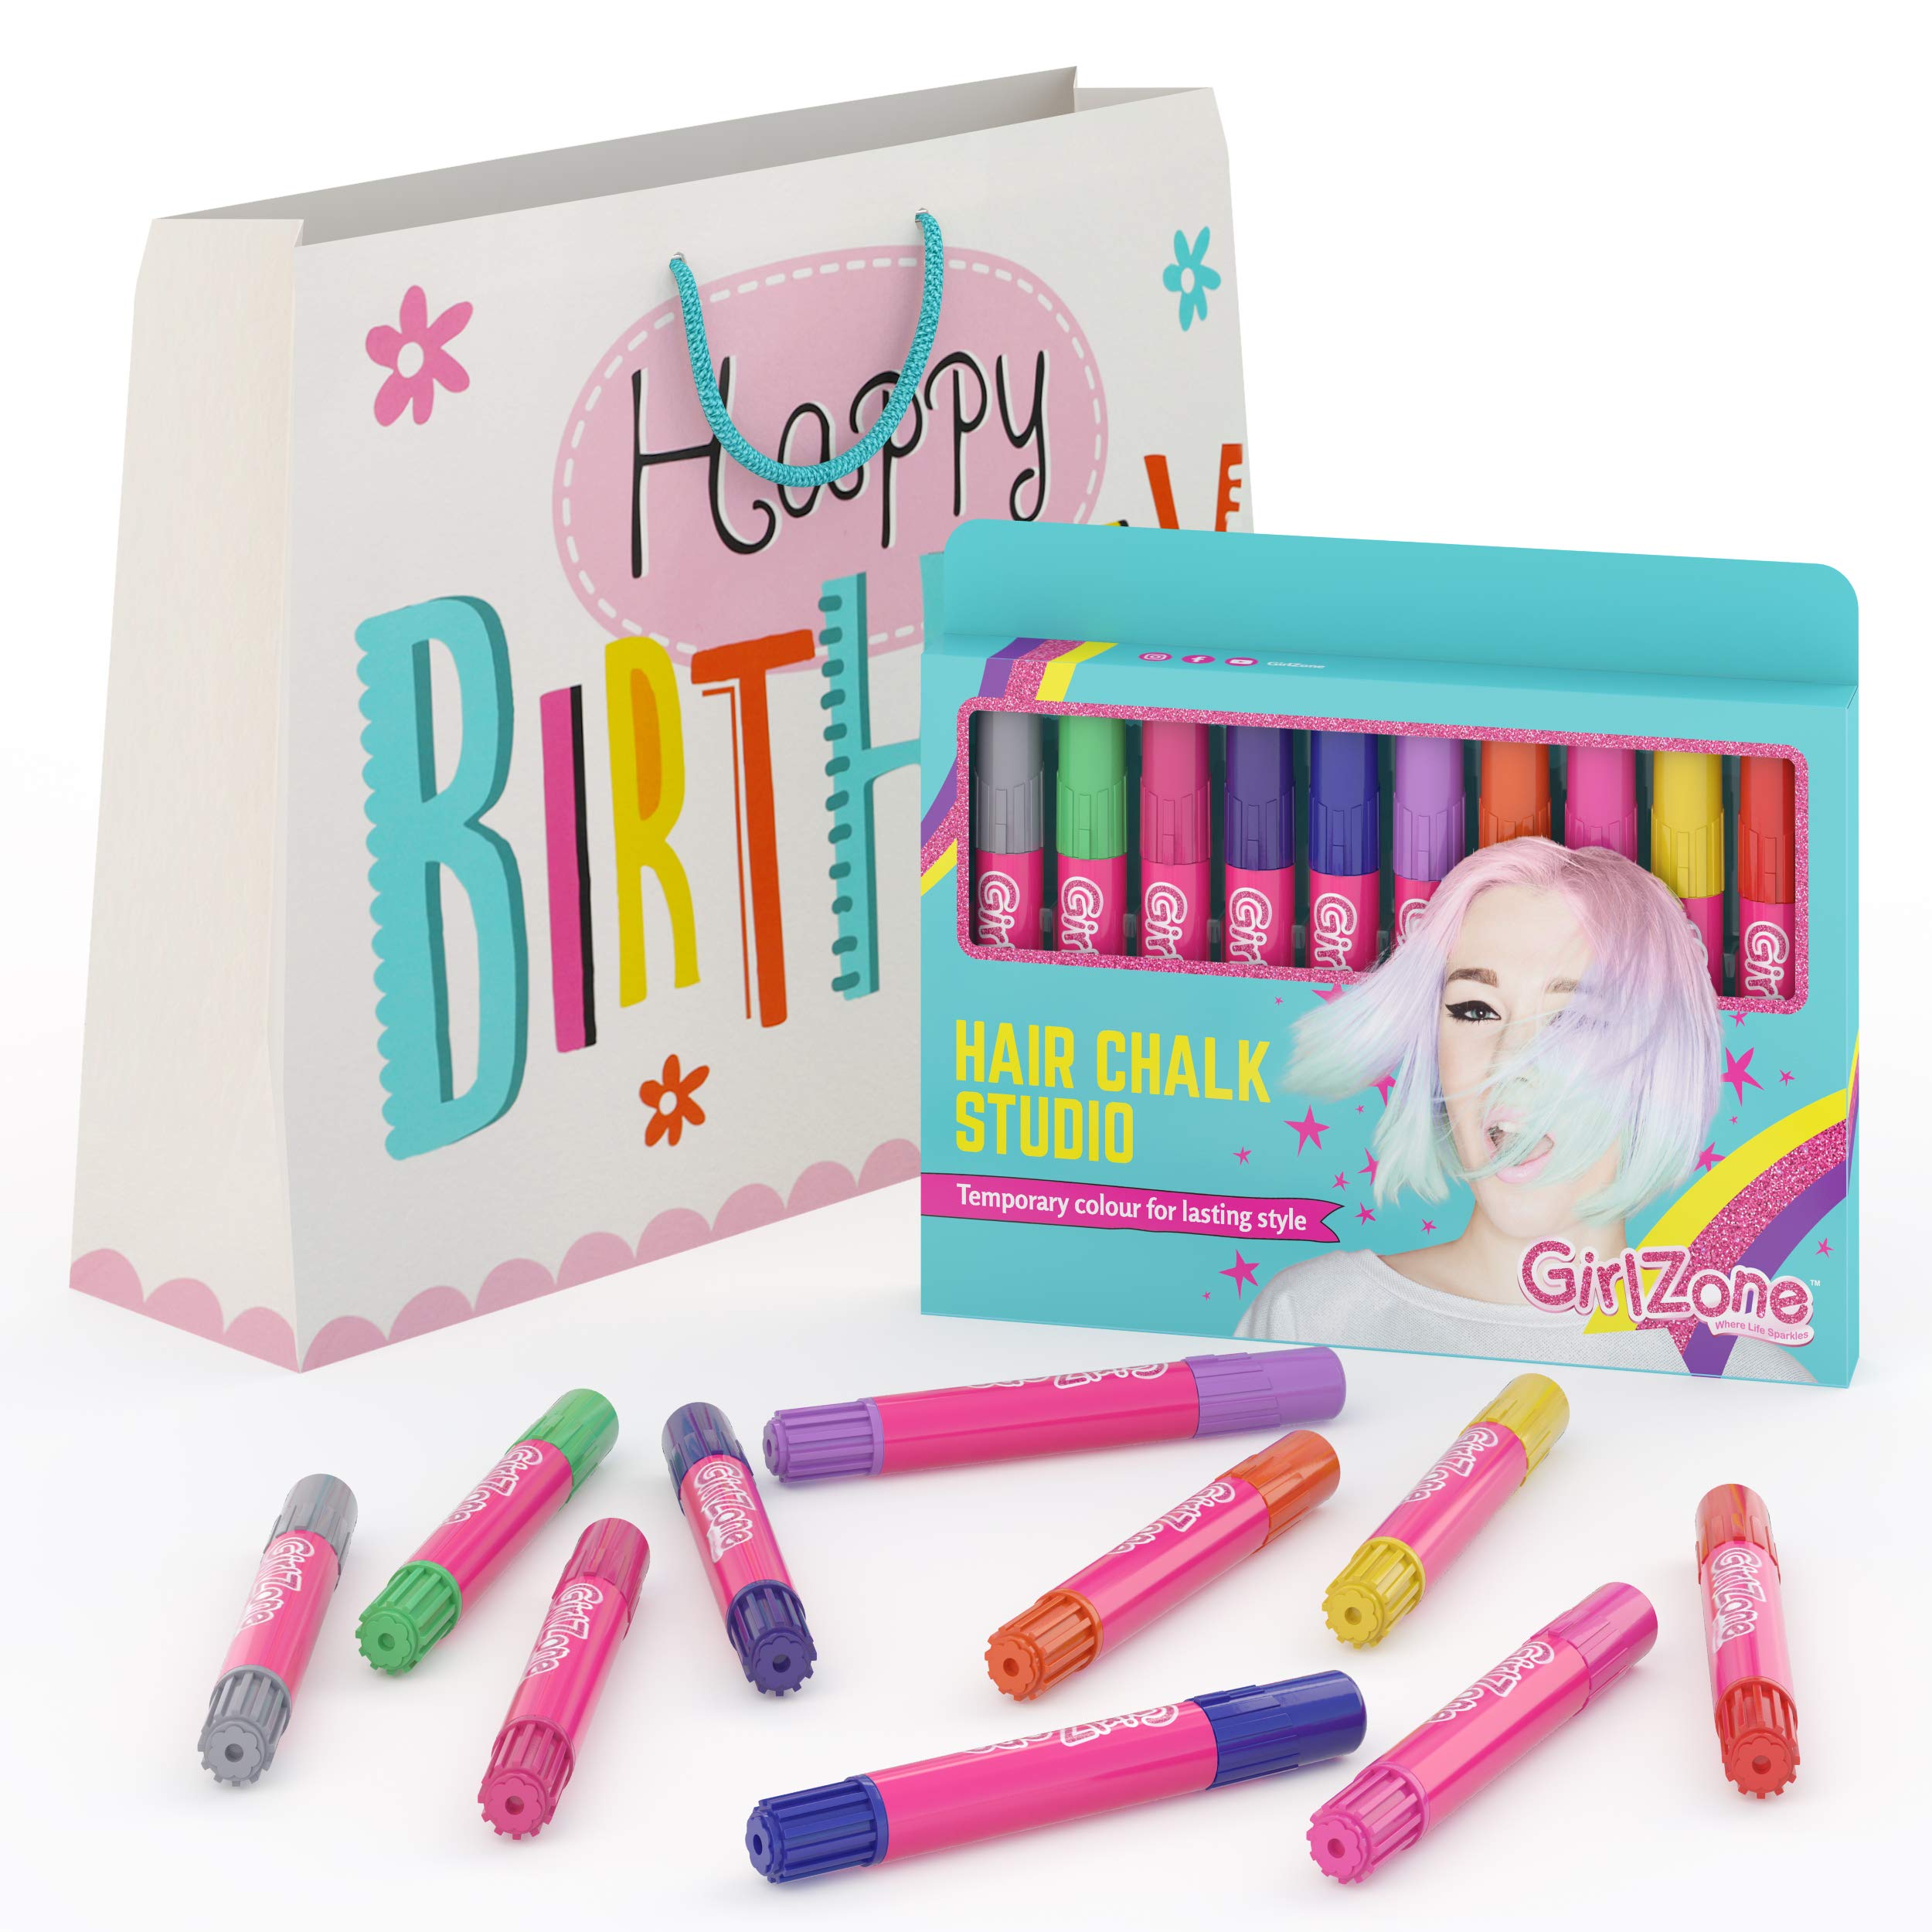 GirlZone Hair Chalks Set, 10-Piece Temporary Hair Chalks Color, Girl Toys For Girls Ages 8-12, Birthday Gifts For Girls & Girls Toys 8-10 Years Old